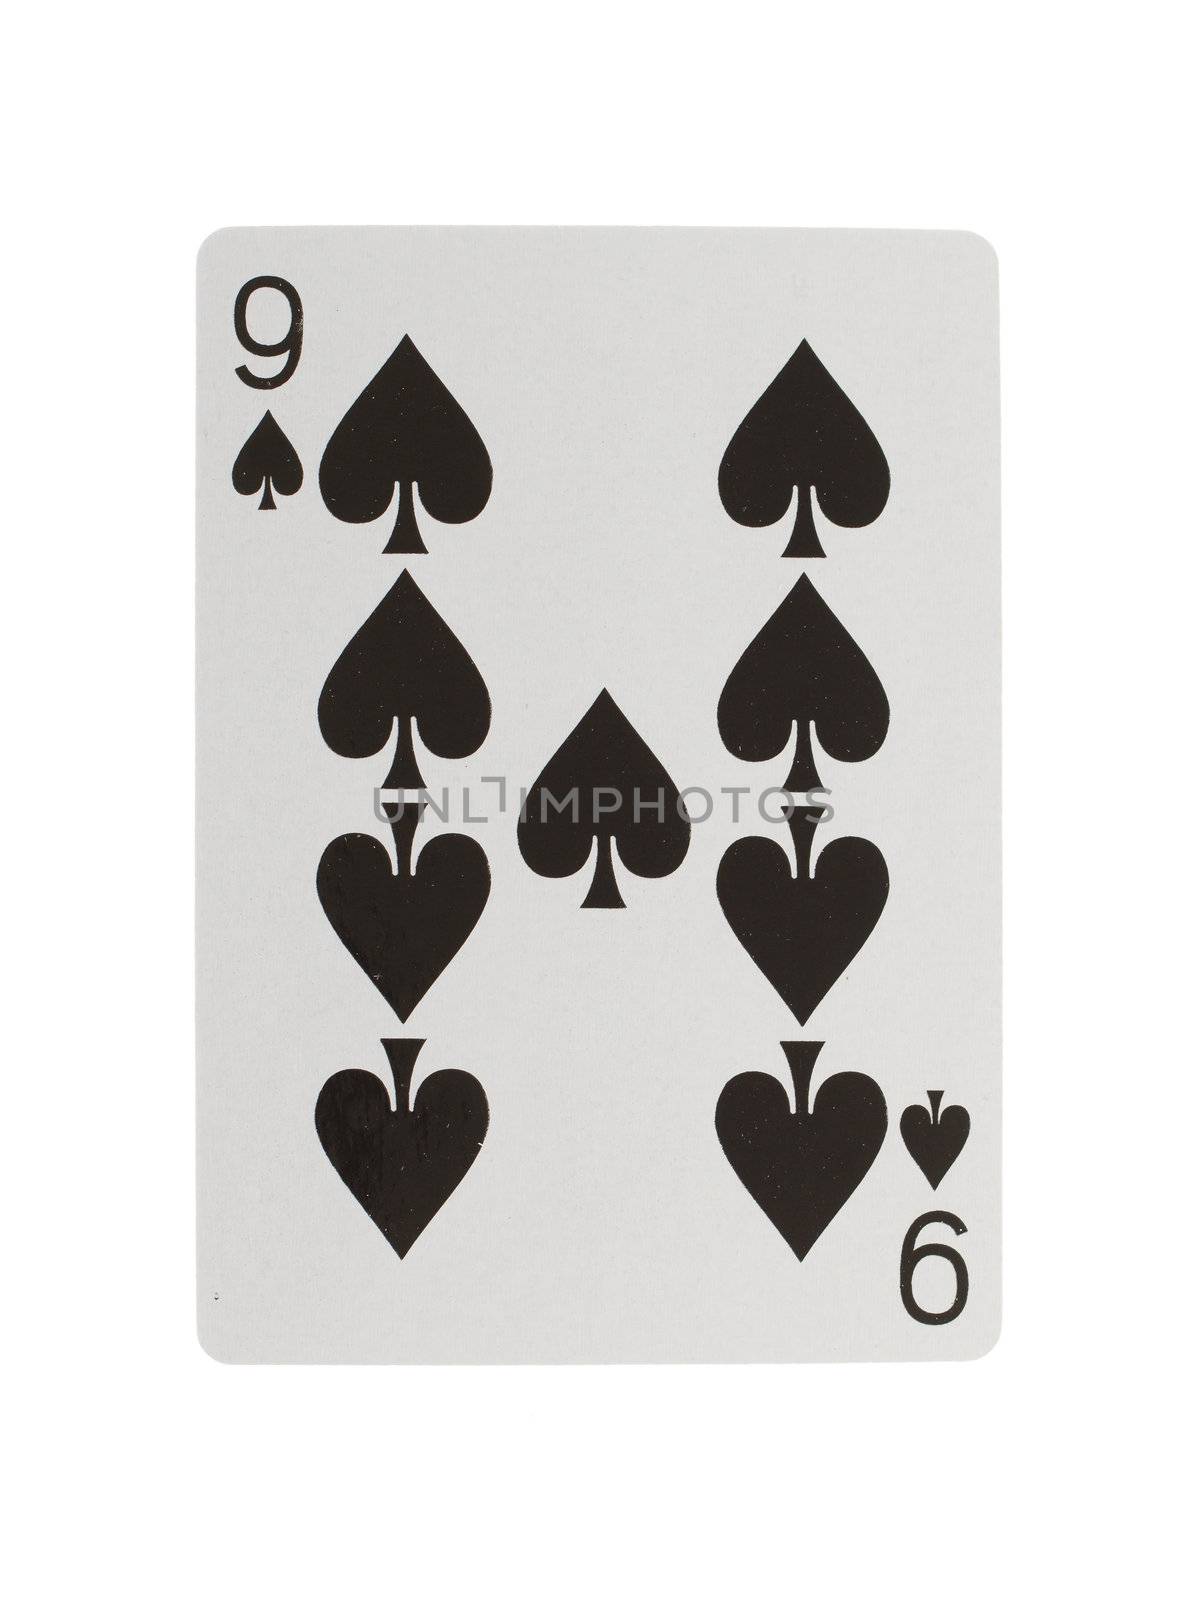 Old playing card (nine) isolated on a white background